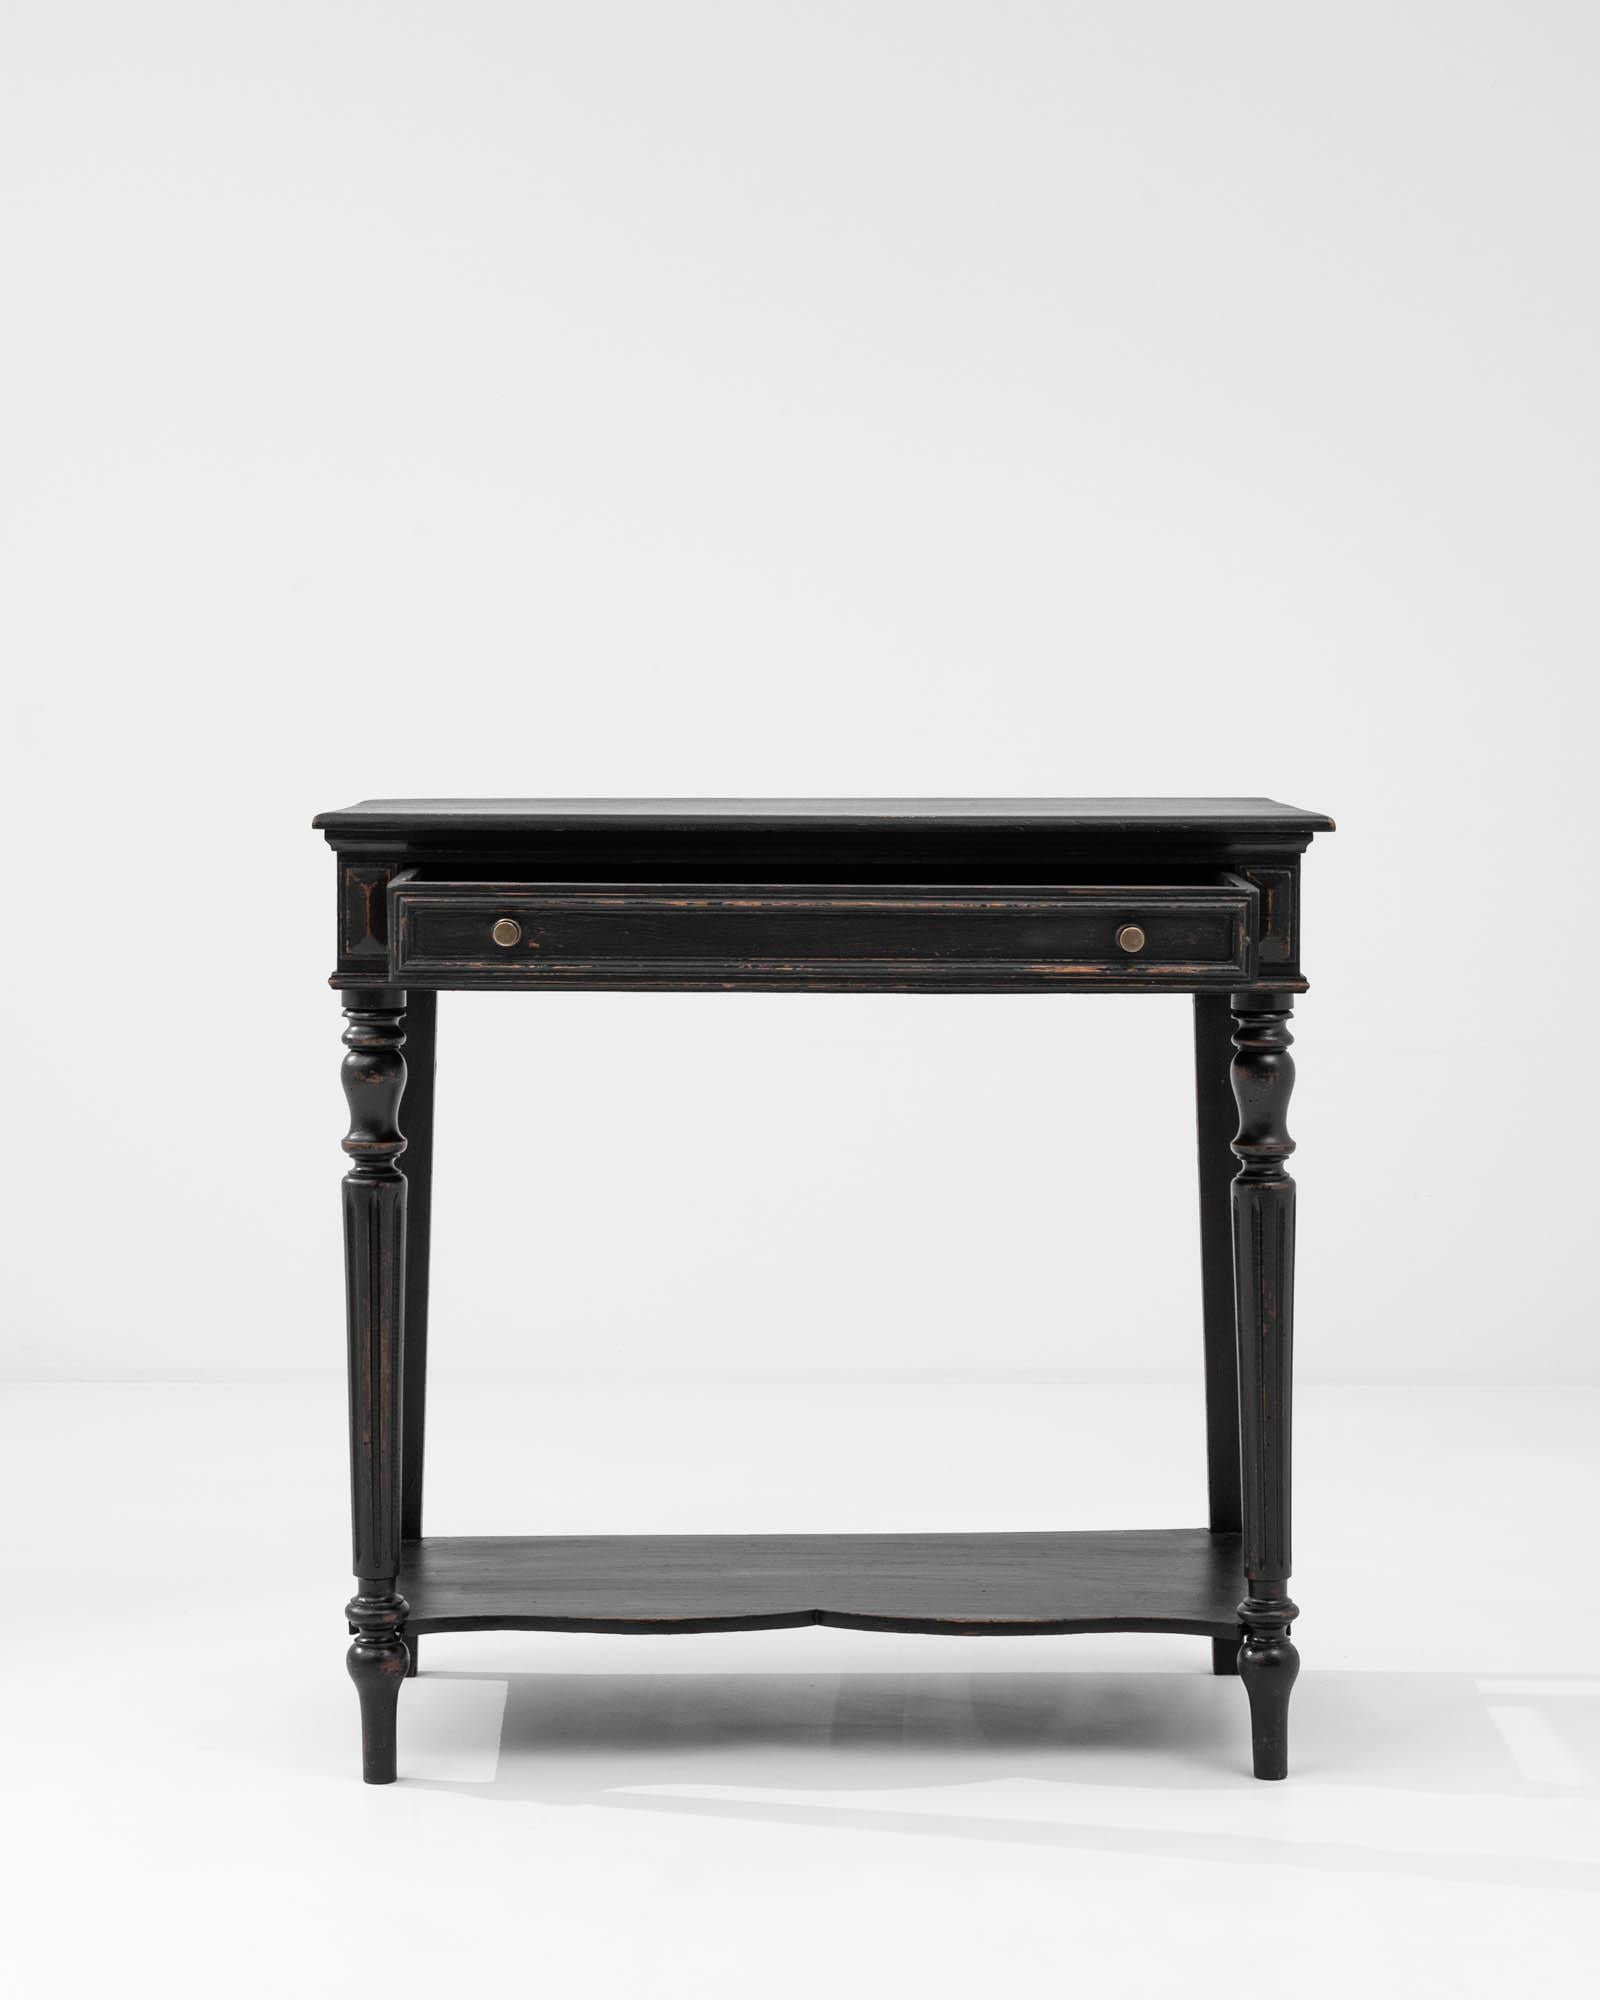 Introduce an air of timeless sophistication into your living space with this 19th Century French Wooden Black Patinated Side Table. The single drawer ensures practical storage, while the intricately designed platform near the legs doubles as a